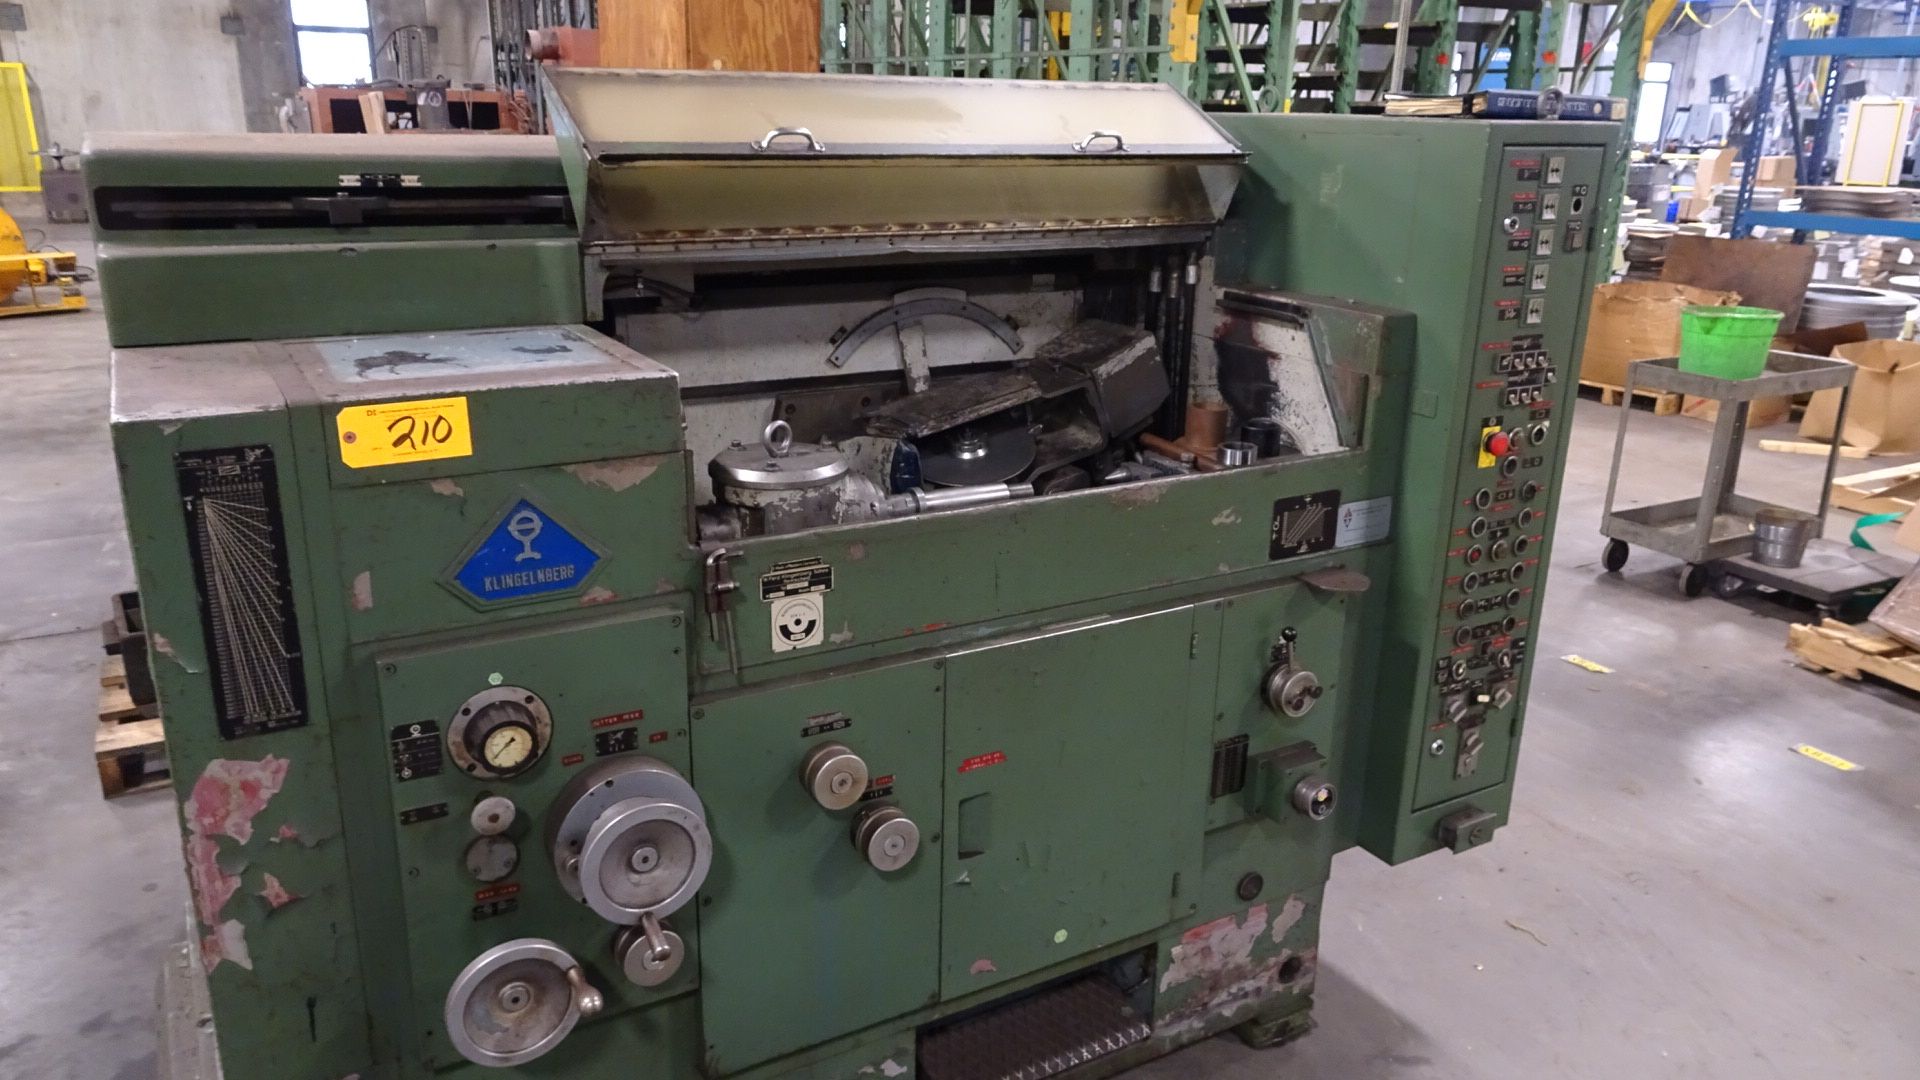 Klingenberg Hob Grinder\Cutter Shaper, Type AGW 231, with Tooling & Gearing, sn:3546 - Image 2 of 5